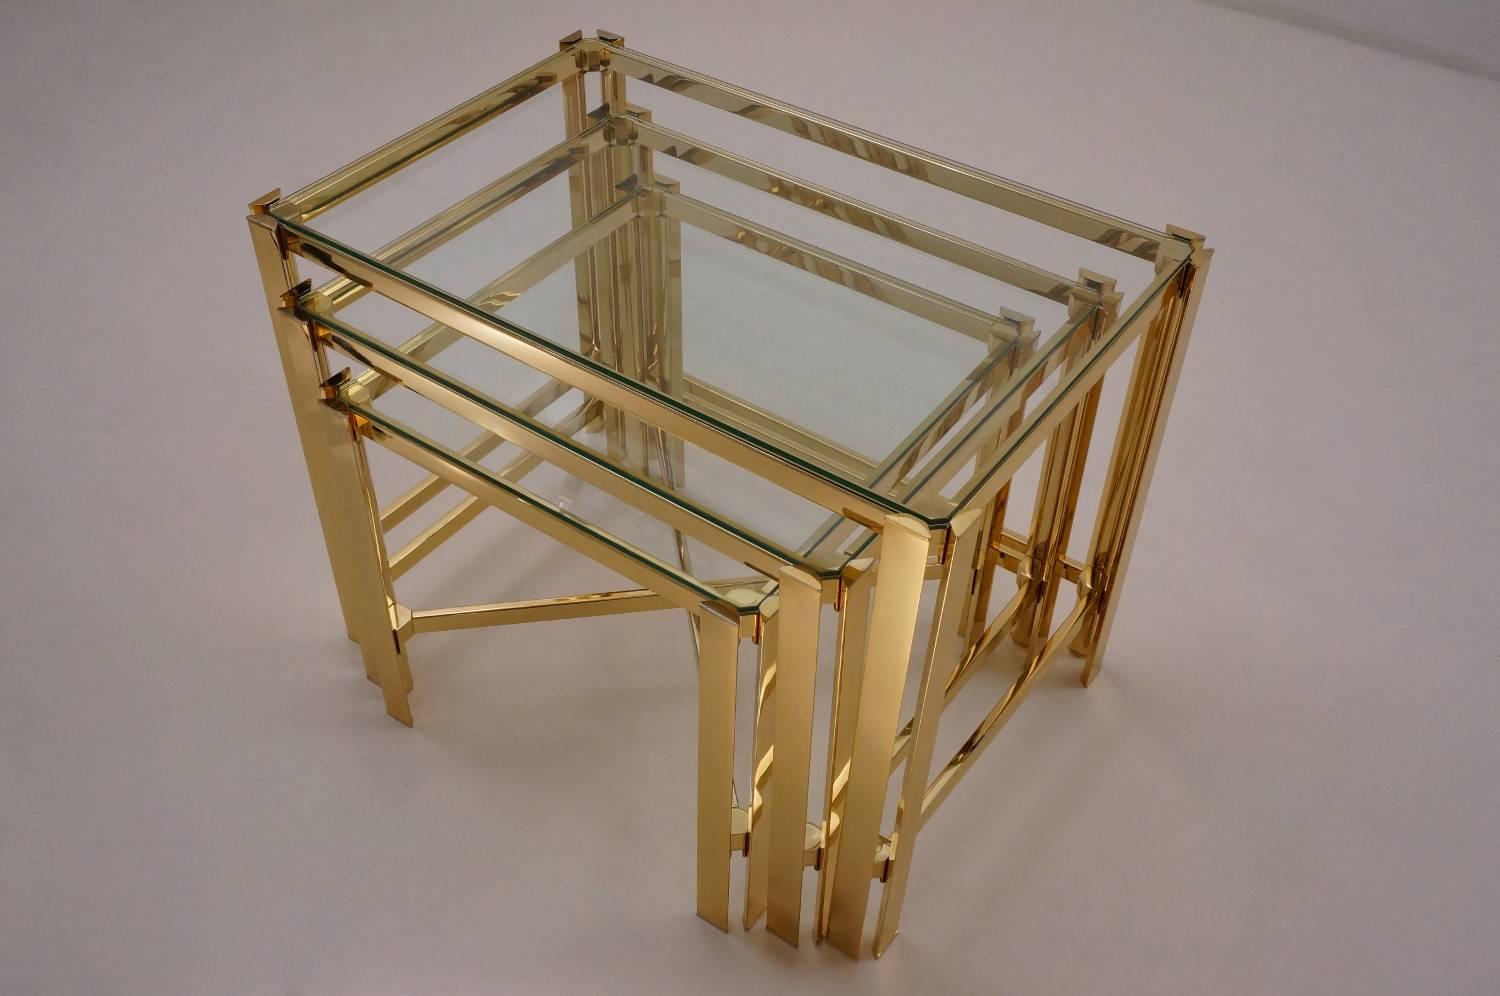 Gold nesting tables, gold-plated gilt frames with glass tops by Pierre Vandel, circa 1970, French.

This set of tables have been gently cleaned respecting the vintage patina and they are ready to use.

With their geometric sculptural forms this